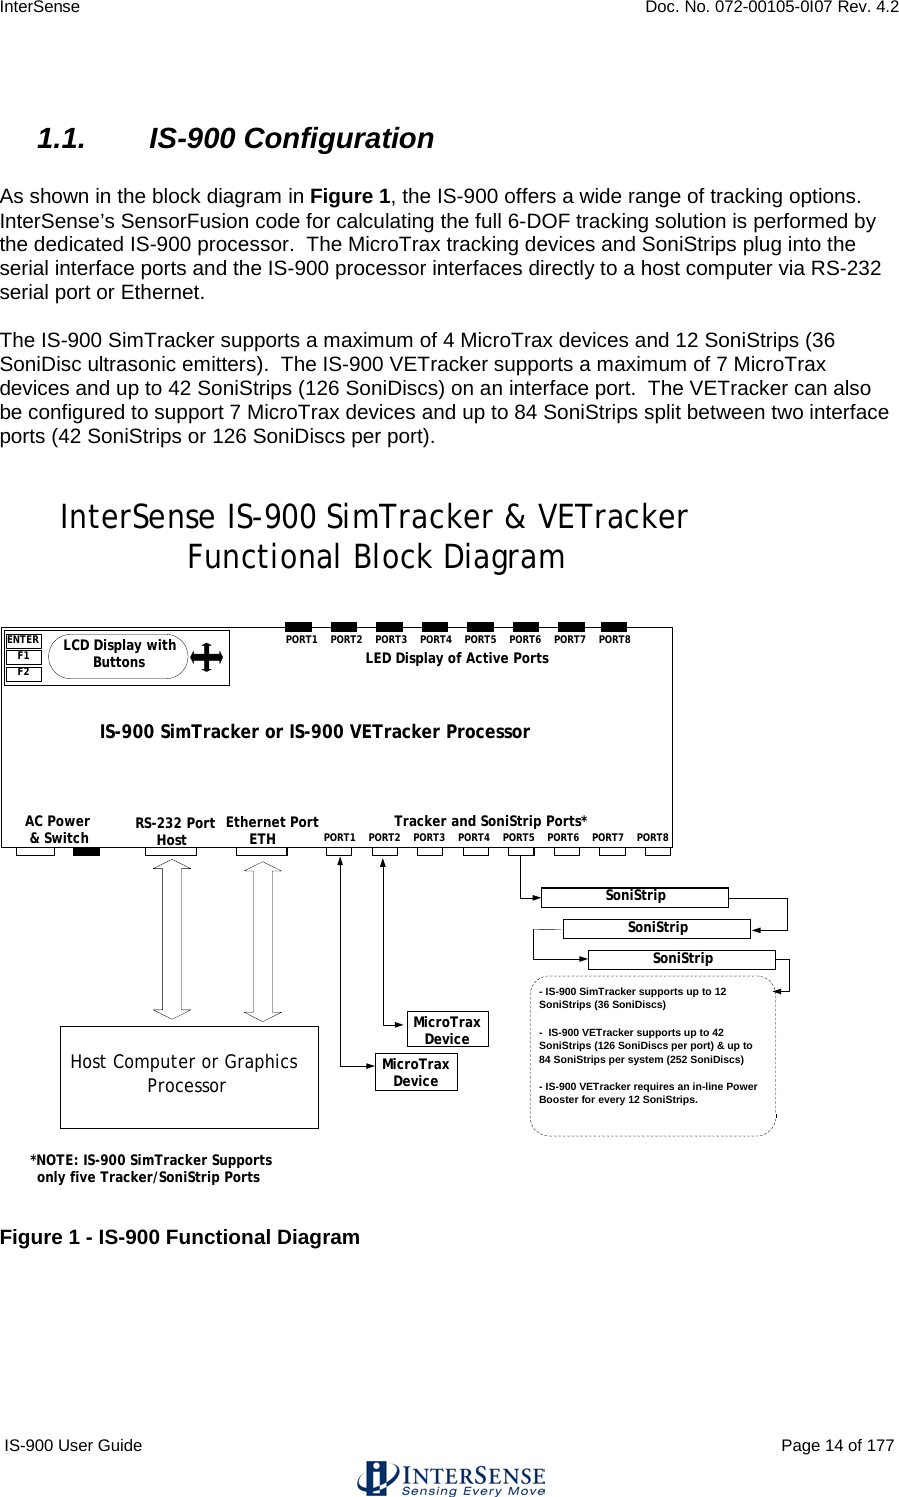 InterSense    Doc. No. 072-00105-0I07 Rev. 4.2 IS-900 User Guide                                                                                                                                          Page 14 of 177   1.1. IS-900 Configuration  As shown in the block diagram in Figure 1, the IS-900 offers a wide range of tracking options.  InterSense’s SensorFusion code for calculating the full 6-DOF tracking solution is performed by the dedicated IS-900 processor.  The MicroTrax tracking devices and SoniStrips plug into the serial interface ports and the IS-900 processor interfaces directly to a host computer via RS-232 serial port or Ethernet.    The IS-900 SimTracker supports a maximum of 4 MicroTrax devices and 12 SoniStrips (36 SoniDisc ultrasonic emitters).  The IS-900 VETracker supports a maximum of 7 MicroTrax devices and up to 42 SoniStrips (126 SoniDiscs) on an interface port.  The VETracker can also be configured to support 7 MicroTrax devices and up to 84 SoniStrips split between two interface ports (42 SoniStrips or 126 SoniDiscs per port).      Figure 1 - IS-900 Functional Diagram        PORT1 RS-232 Port Host MicroTrax Device IS-900 SimTracker or IS-900 VETracker Processor MicroTrax Device      AC Power        &amp; Switch LCD Display with Buttons   Ethernet Port ETH PORT2 PORT3 PORT4 PORT5 PORT6 PORT7 PORT8       Tracker and SoniStrip Ports* PORT1 PORT2 PORT3 PORT4 PORT5 PORT6 PORT7 PORT8 LED Display of Active Ports ENTER F1 F2  *NOTE: IS-900 SimTracker Supports only five Tracker/SoniStrip Ports  SoniStrip SoniStrip SoniStrip - IS-900 SimTracker supports up to 12 SoniStrips (36 SoniDiscs) -  IS-900 VETracker supports up to 42 SoniStrips (126 SoniDiscs per port) &amp; up to 84 SoniStrips per system (252 SoniDiscs) - IS-900 VETracker requires an in-line Power Booster for every 12 SoniStrips. Host Computer or Graphics Processor InterSense IS-900 SimTracker &amp; VETracker Functional Block Diagram    